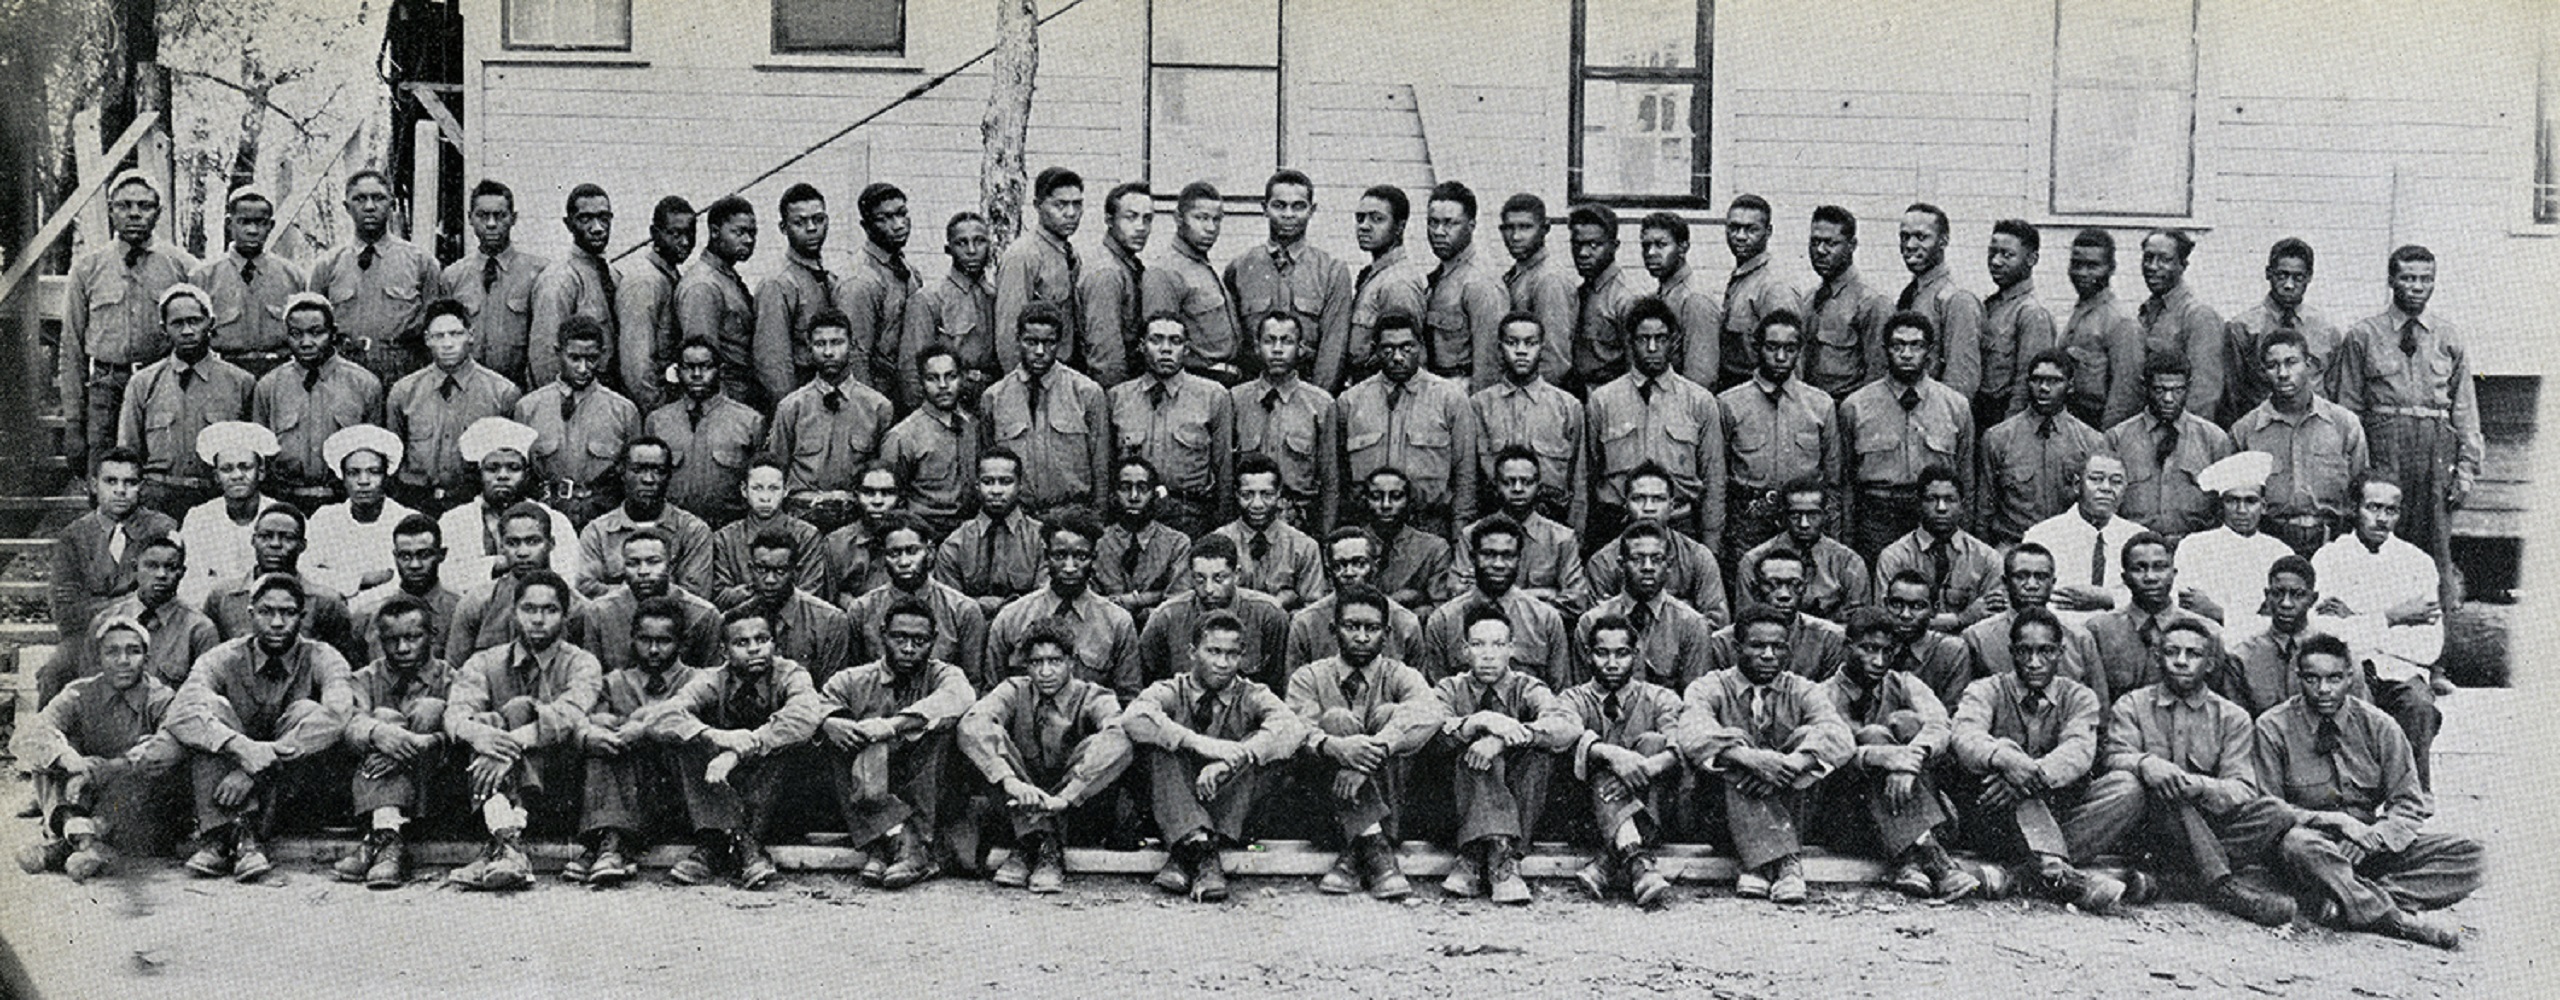 Black and white photo of more than 100 young African American men in uniform posing in front of a building